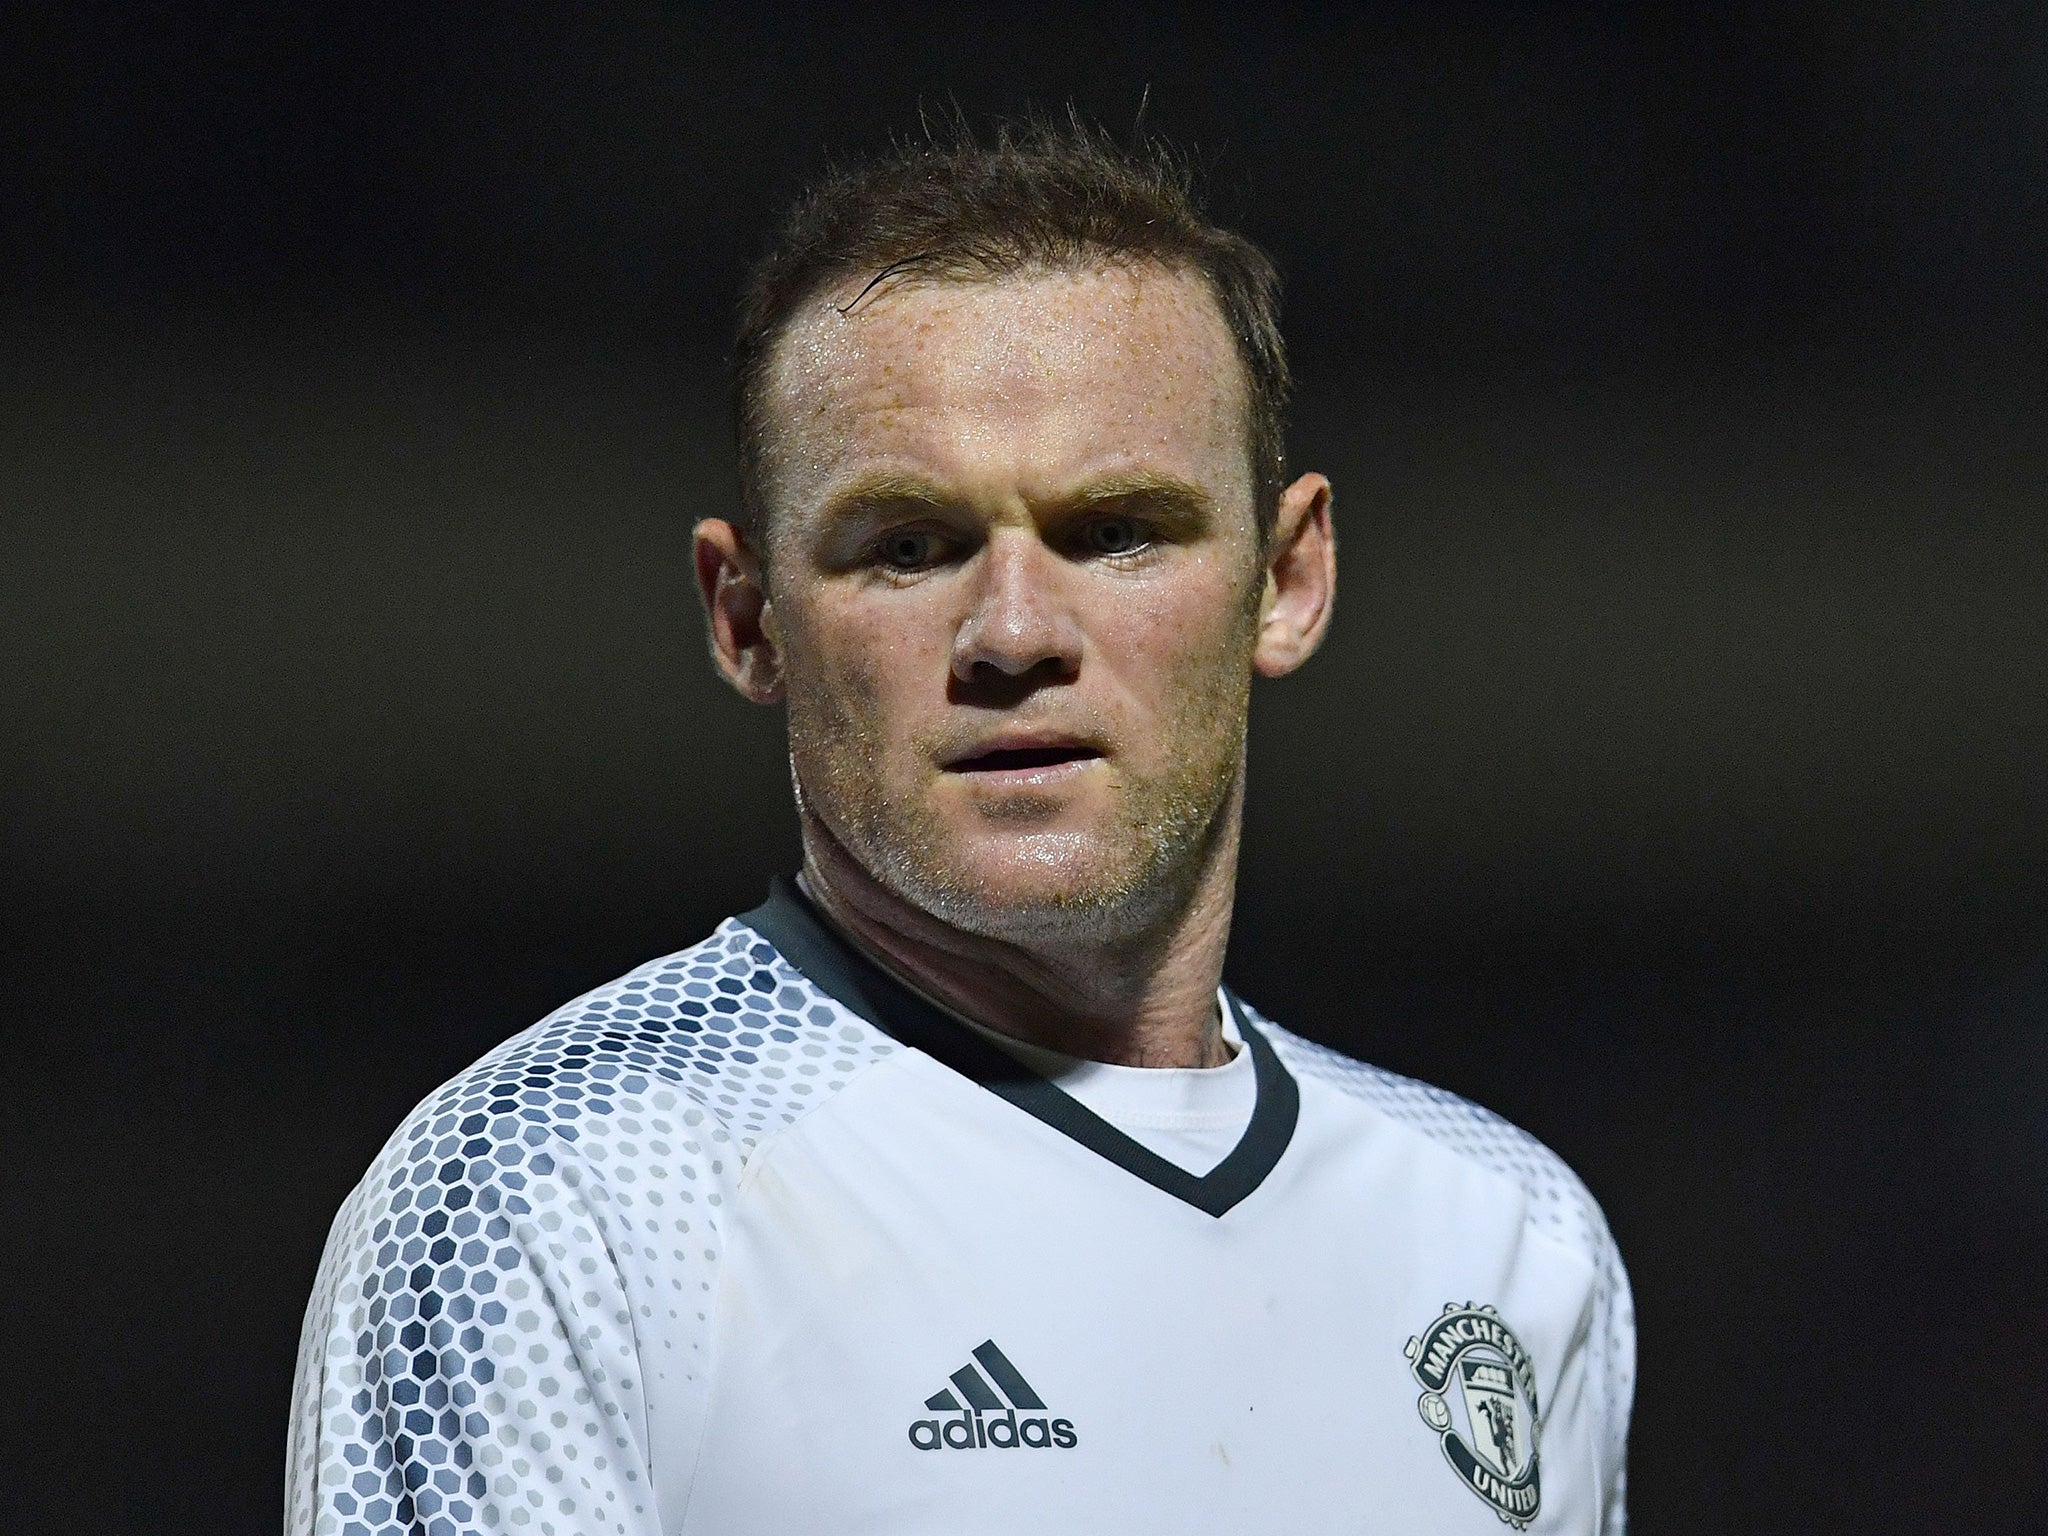 Rooney's recent performances have been widely criticised